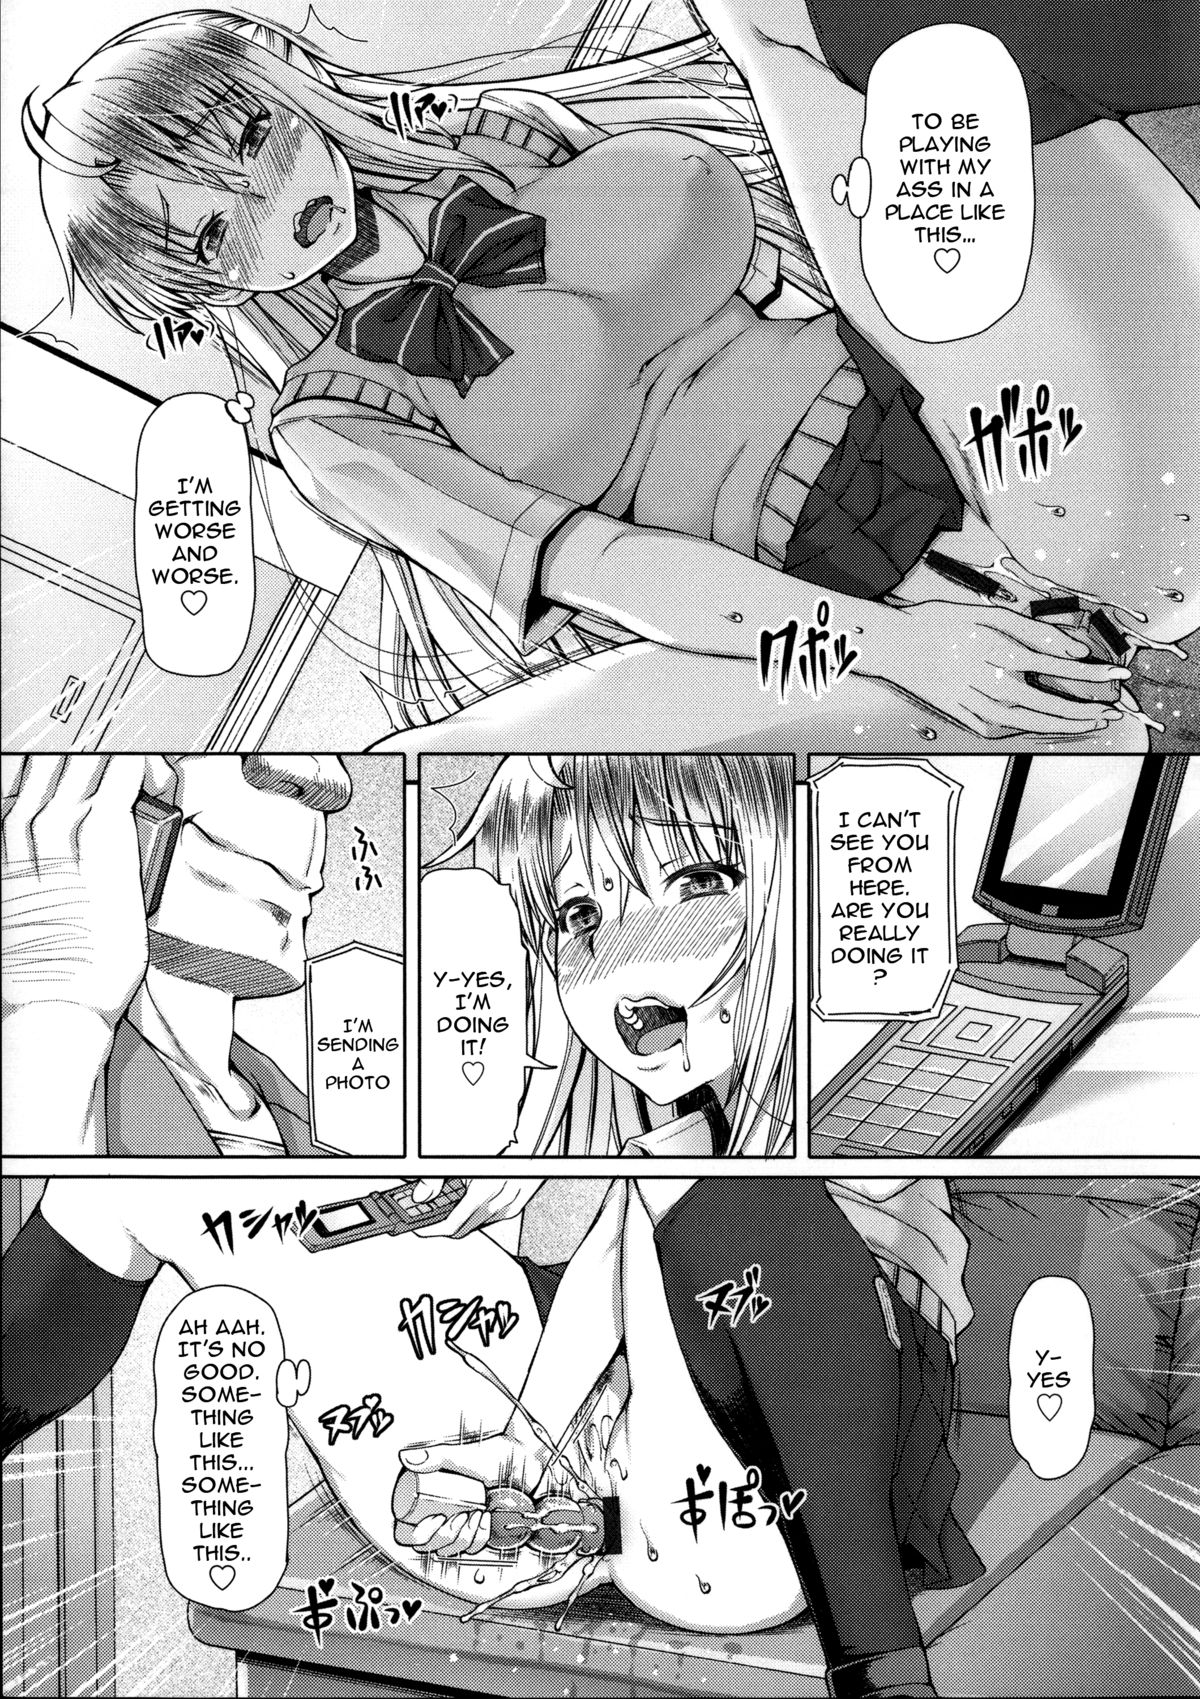 [RED-RUM] LOVE&PEACH Ch. 0-2 [English] {doujin-moe.us} page 18 full